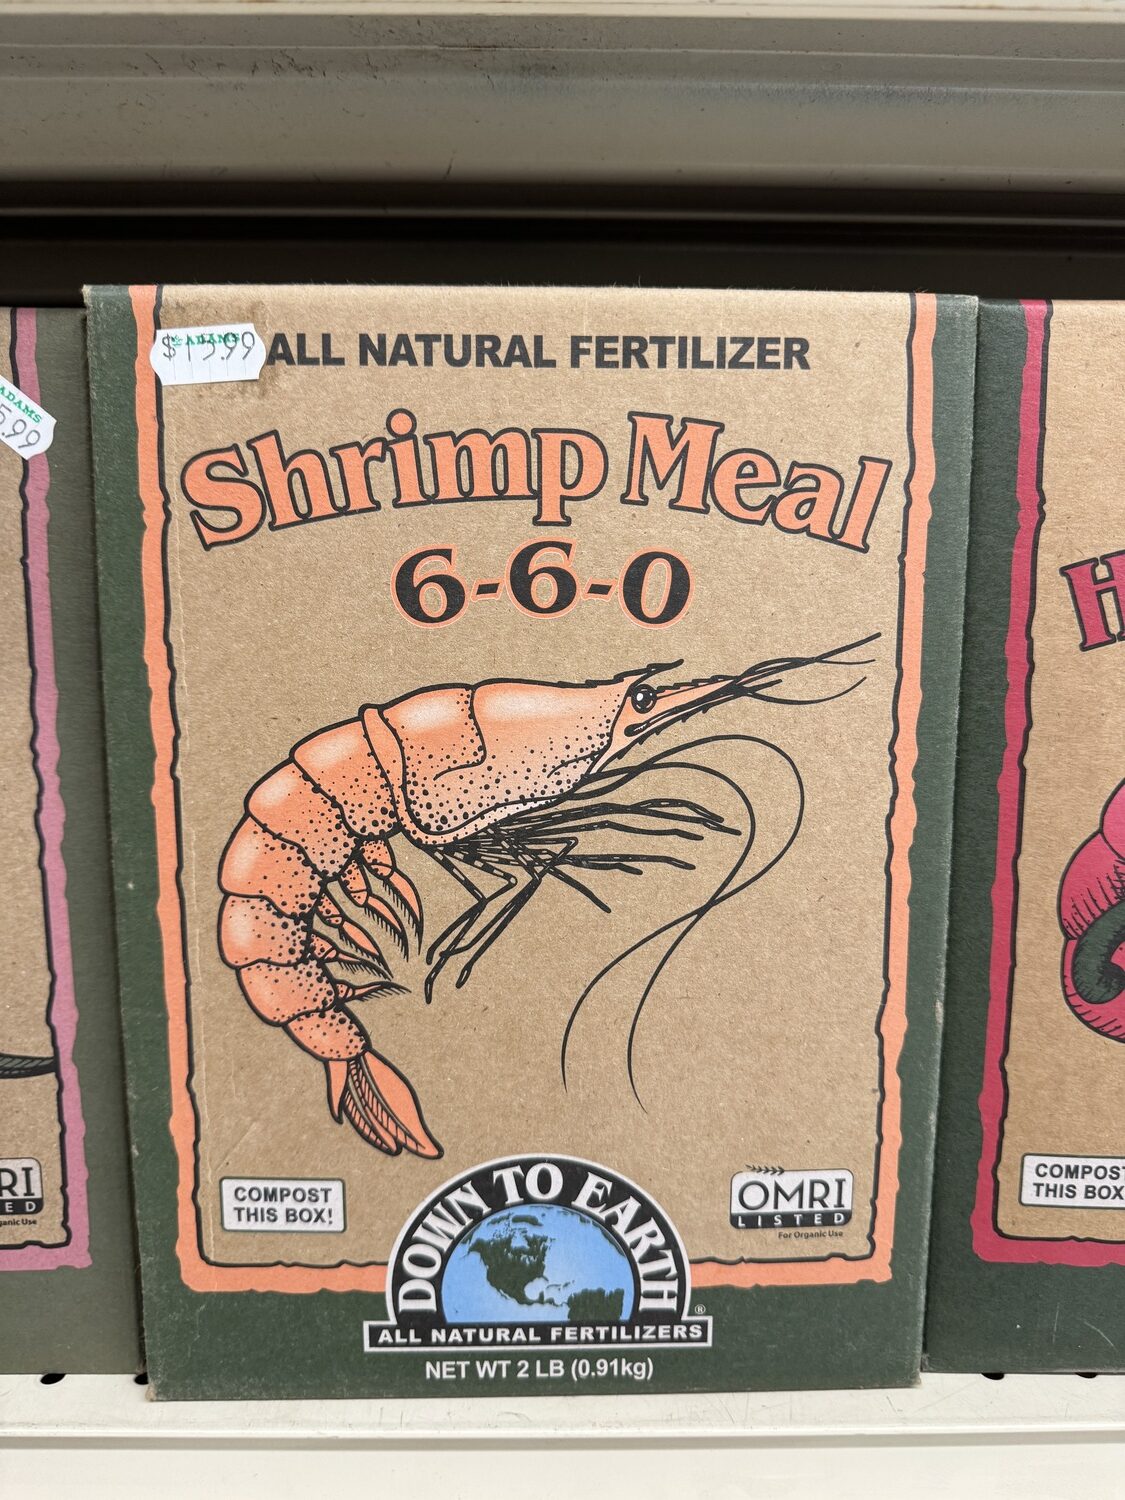 Shrimp meal fertilizer? The plants have no clue there is shrimp on the menu, and the fertizer, derived from the waste of shrimp processing, offers little more than other fertilizers save for some very minor nutrients. What do the numbers mean? Next week.
ANDREW MESSINGER